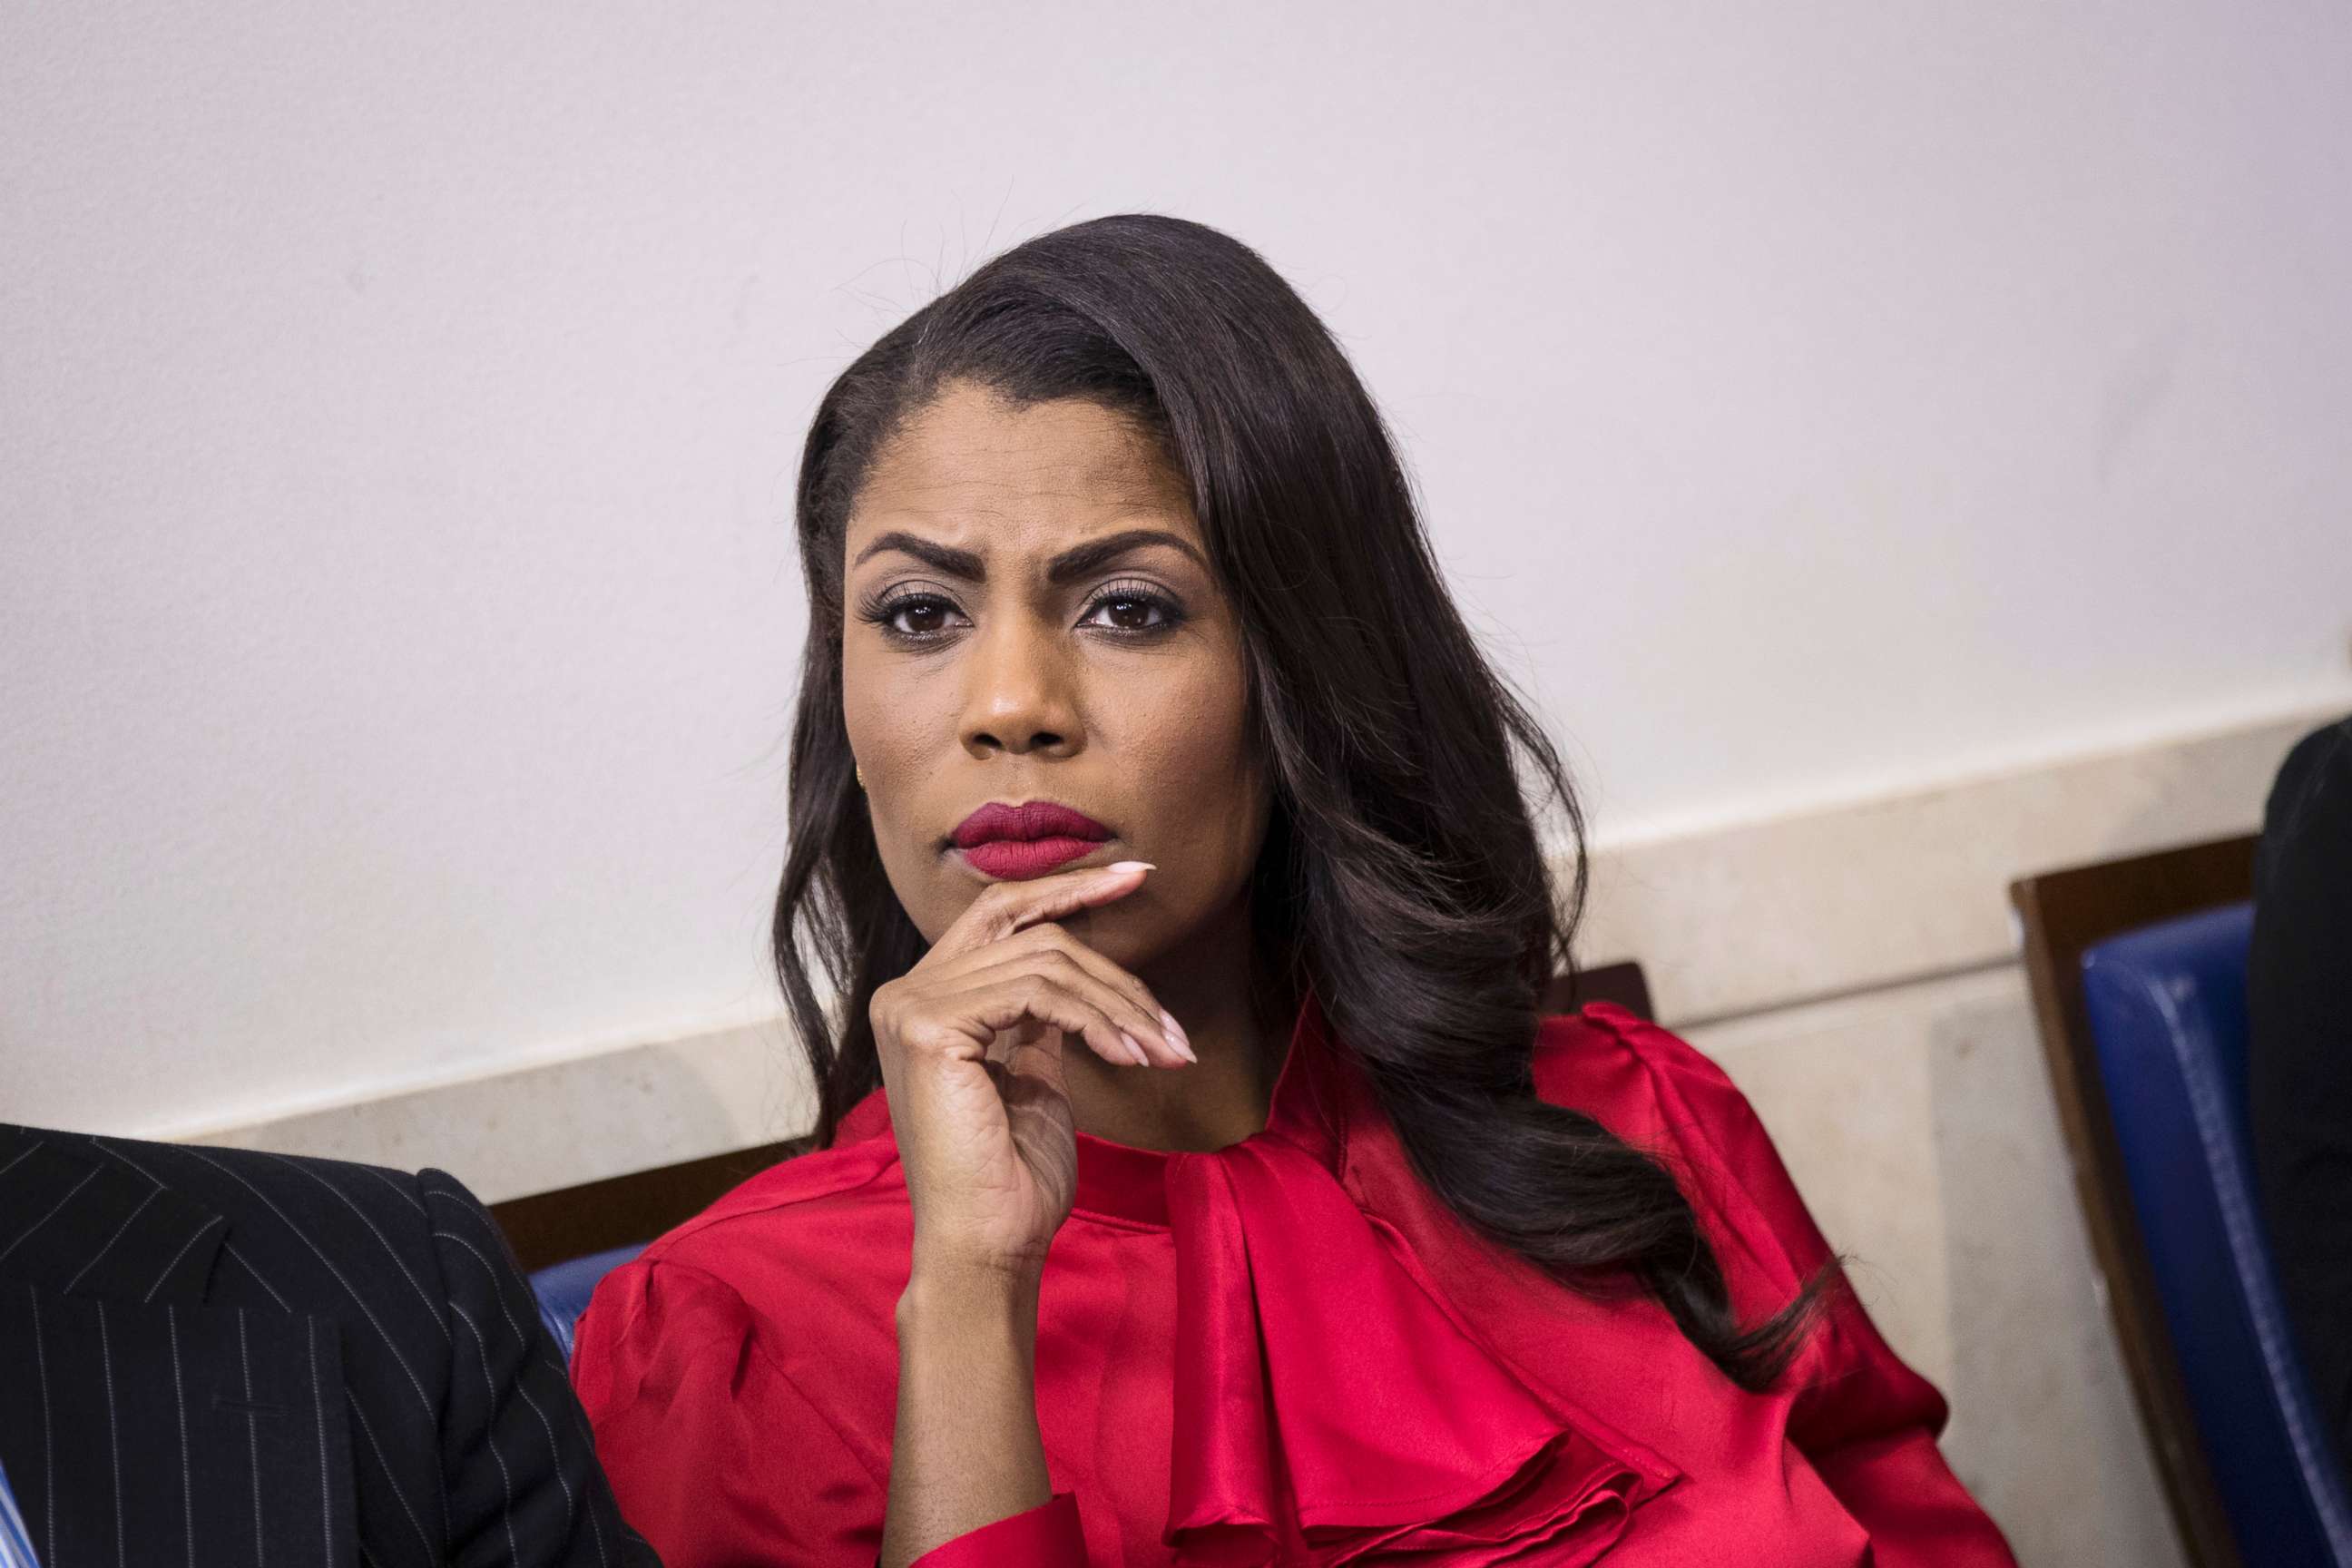 PHOTO: Omarosa Manigault listens during the daily press briefing at the White House, Oct. 27, 2017 in Washington, D.C.